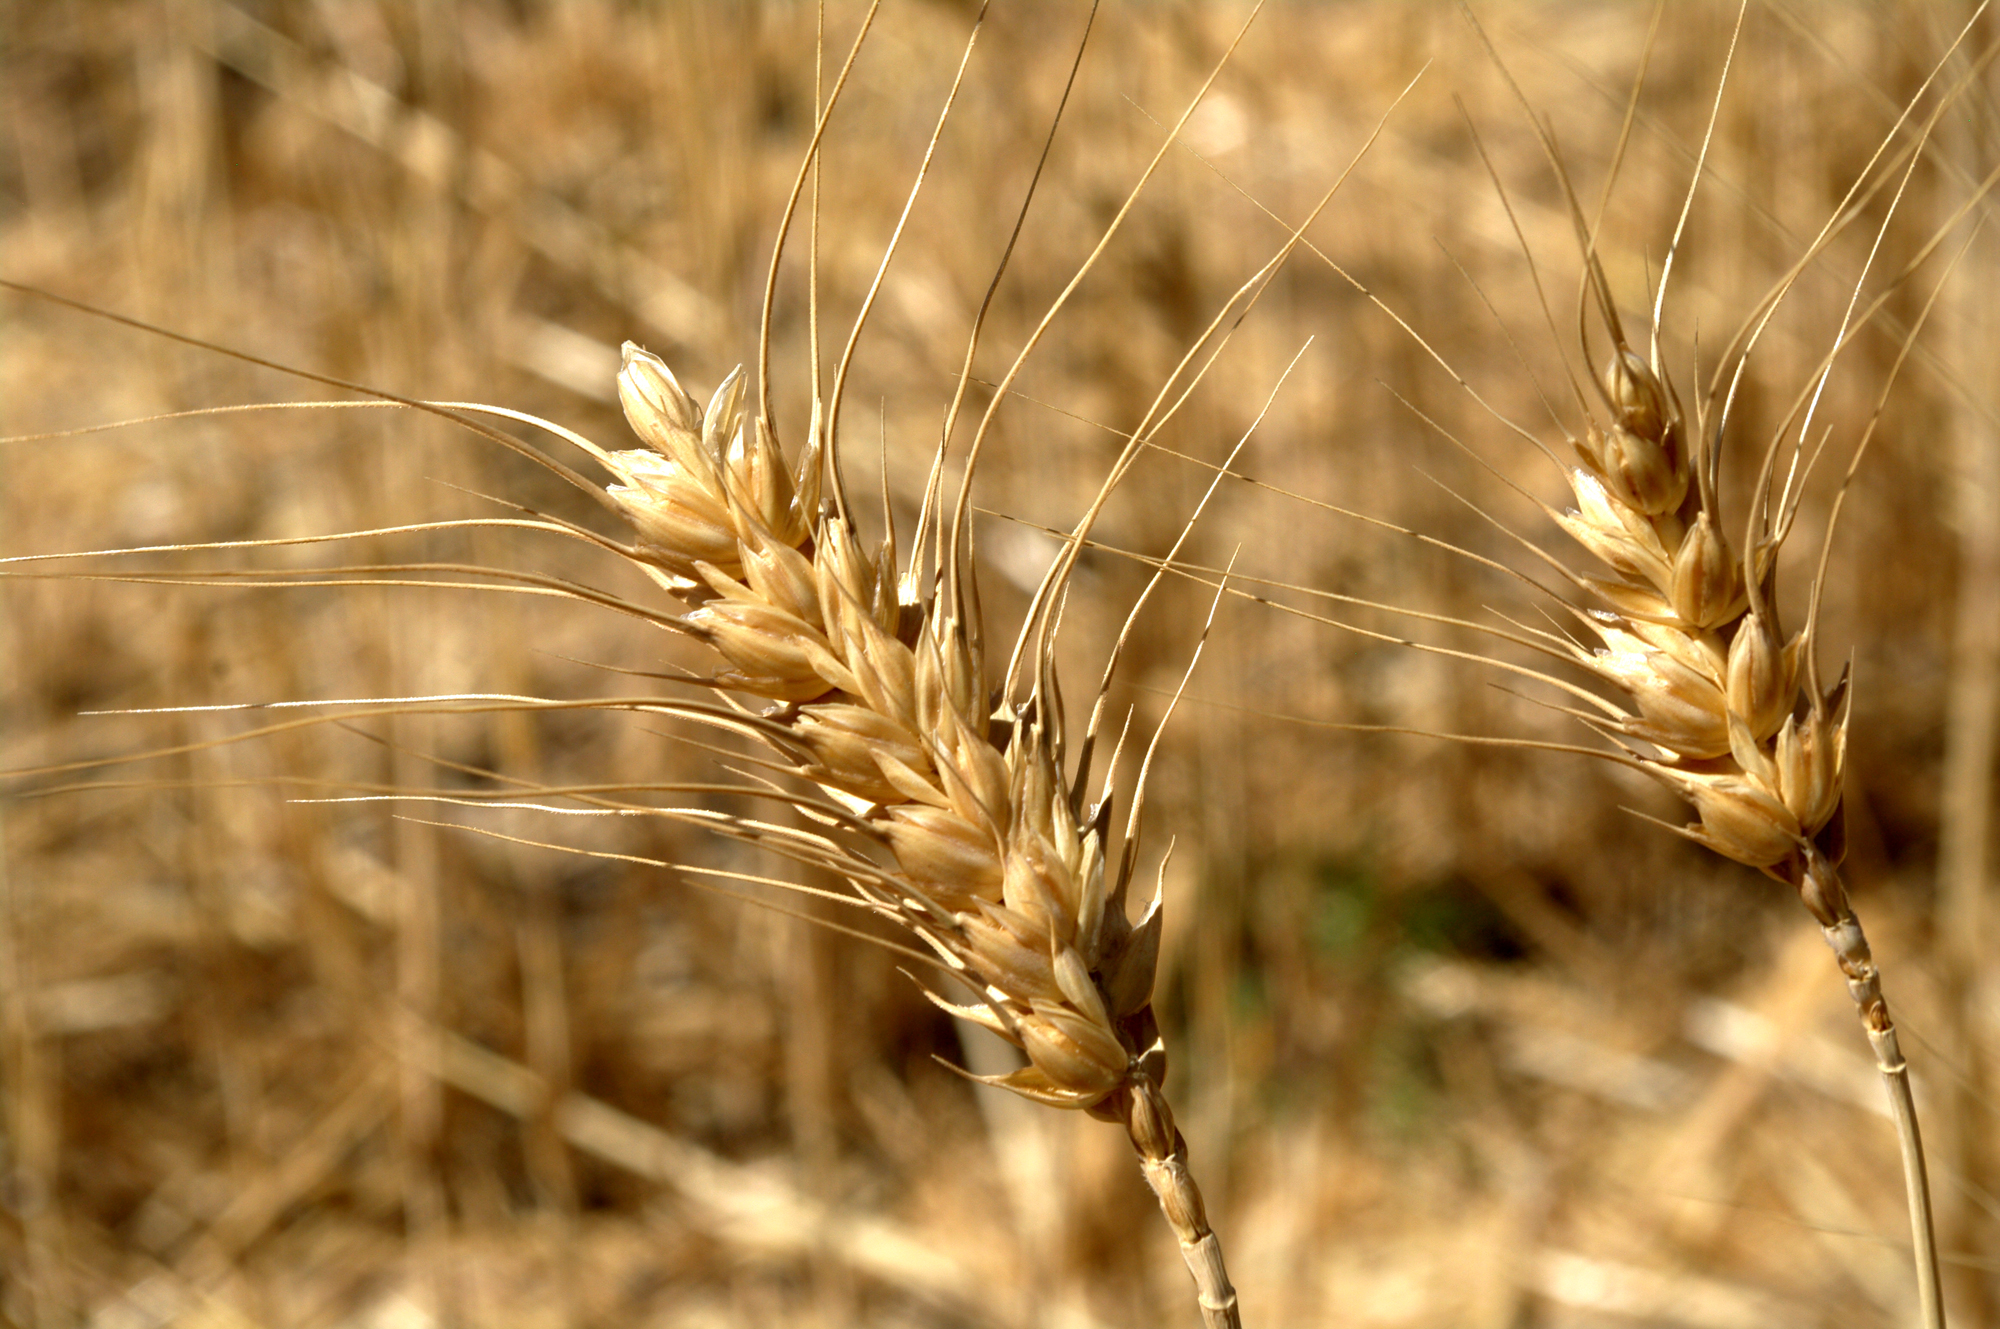 close up image of wheat stalks in a field